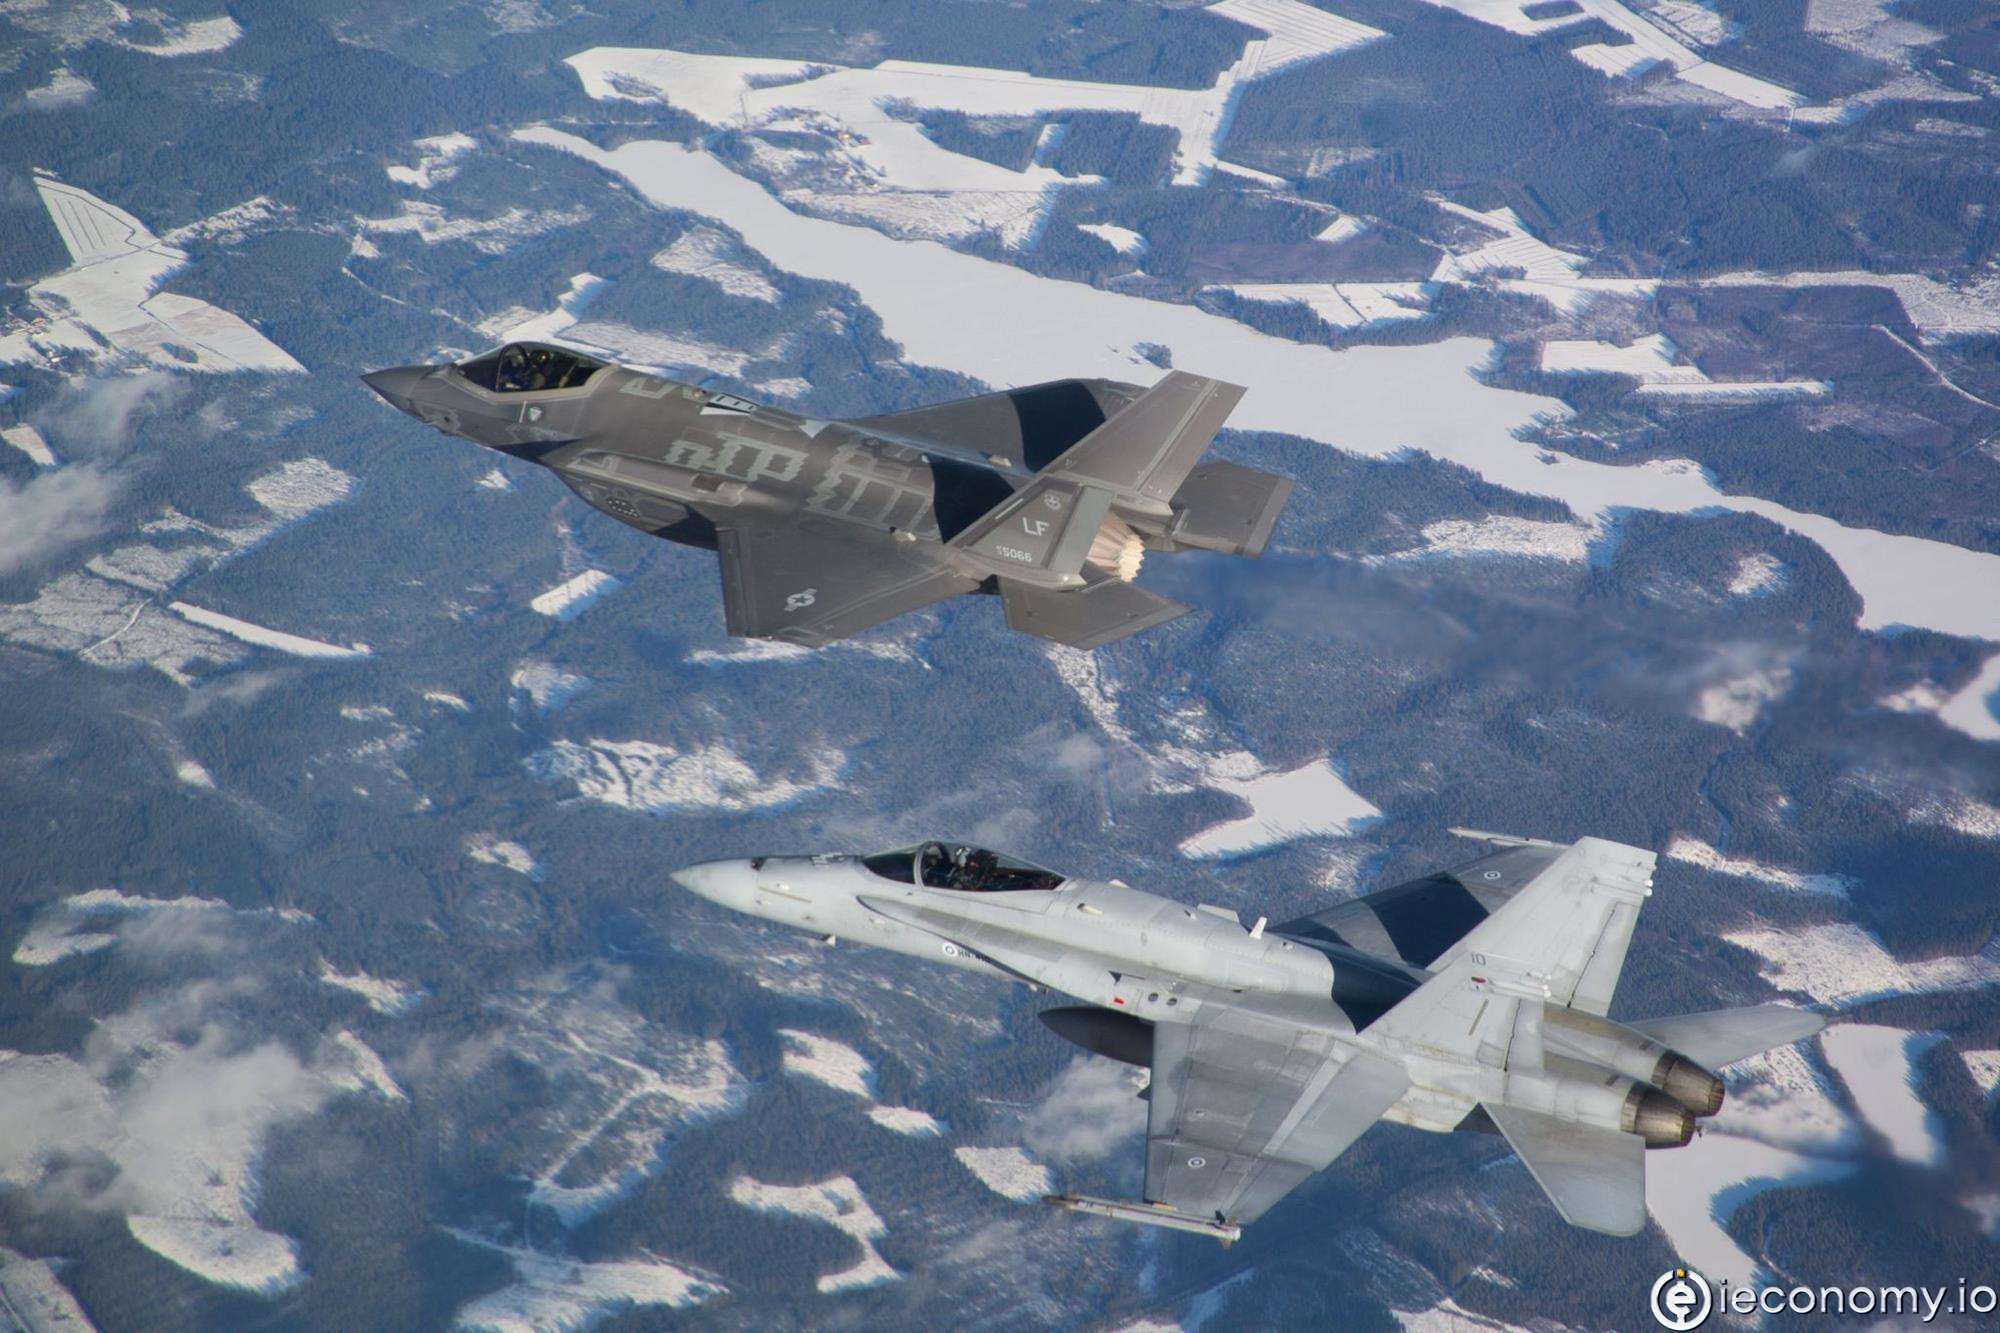 Finland has approved the acquisition of jets from Lockheed Martin